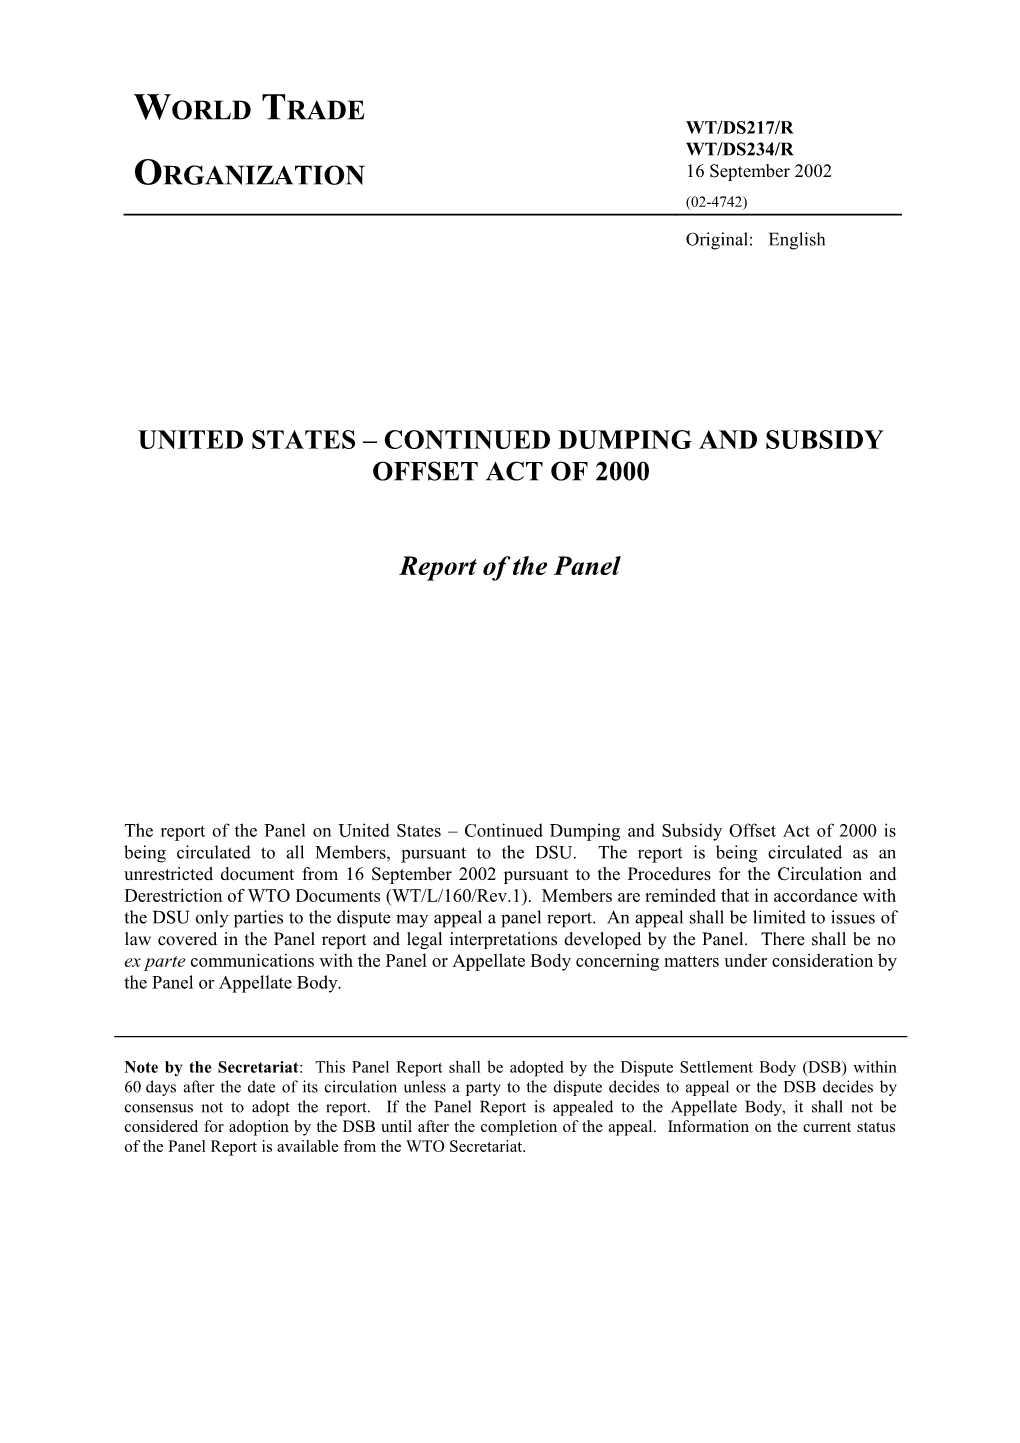 United States Continued Dumping and Subsidy Offset Act of 2000